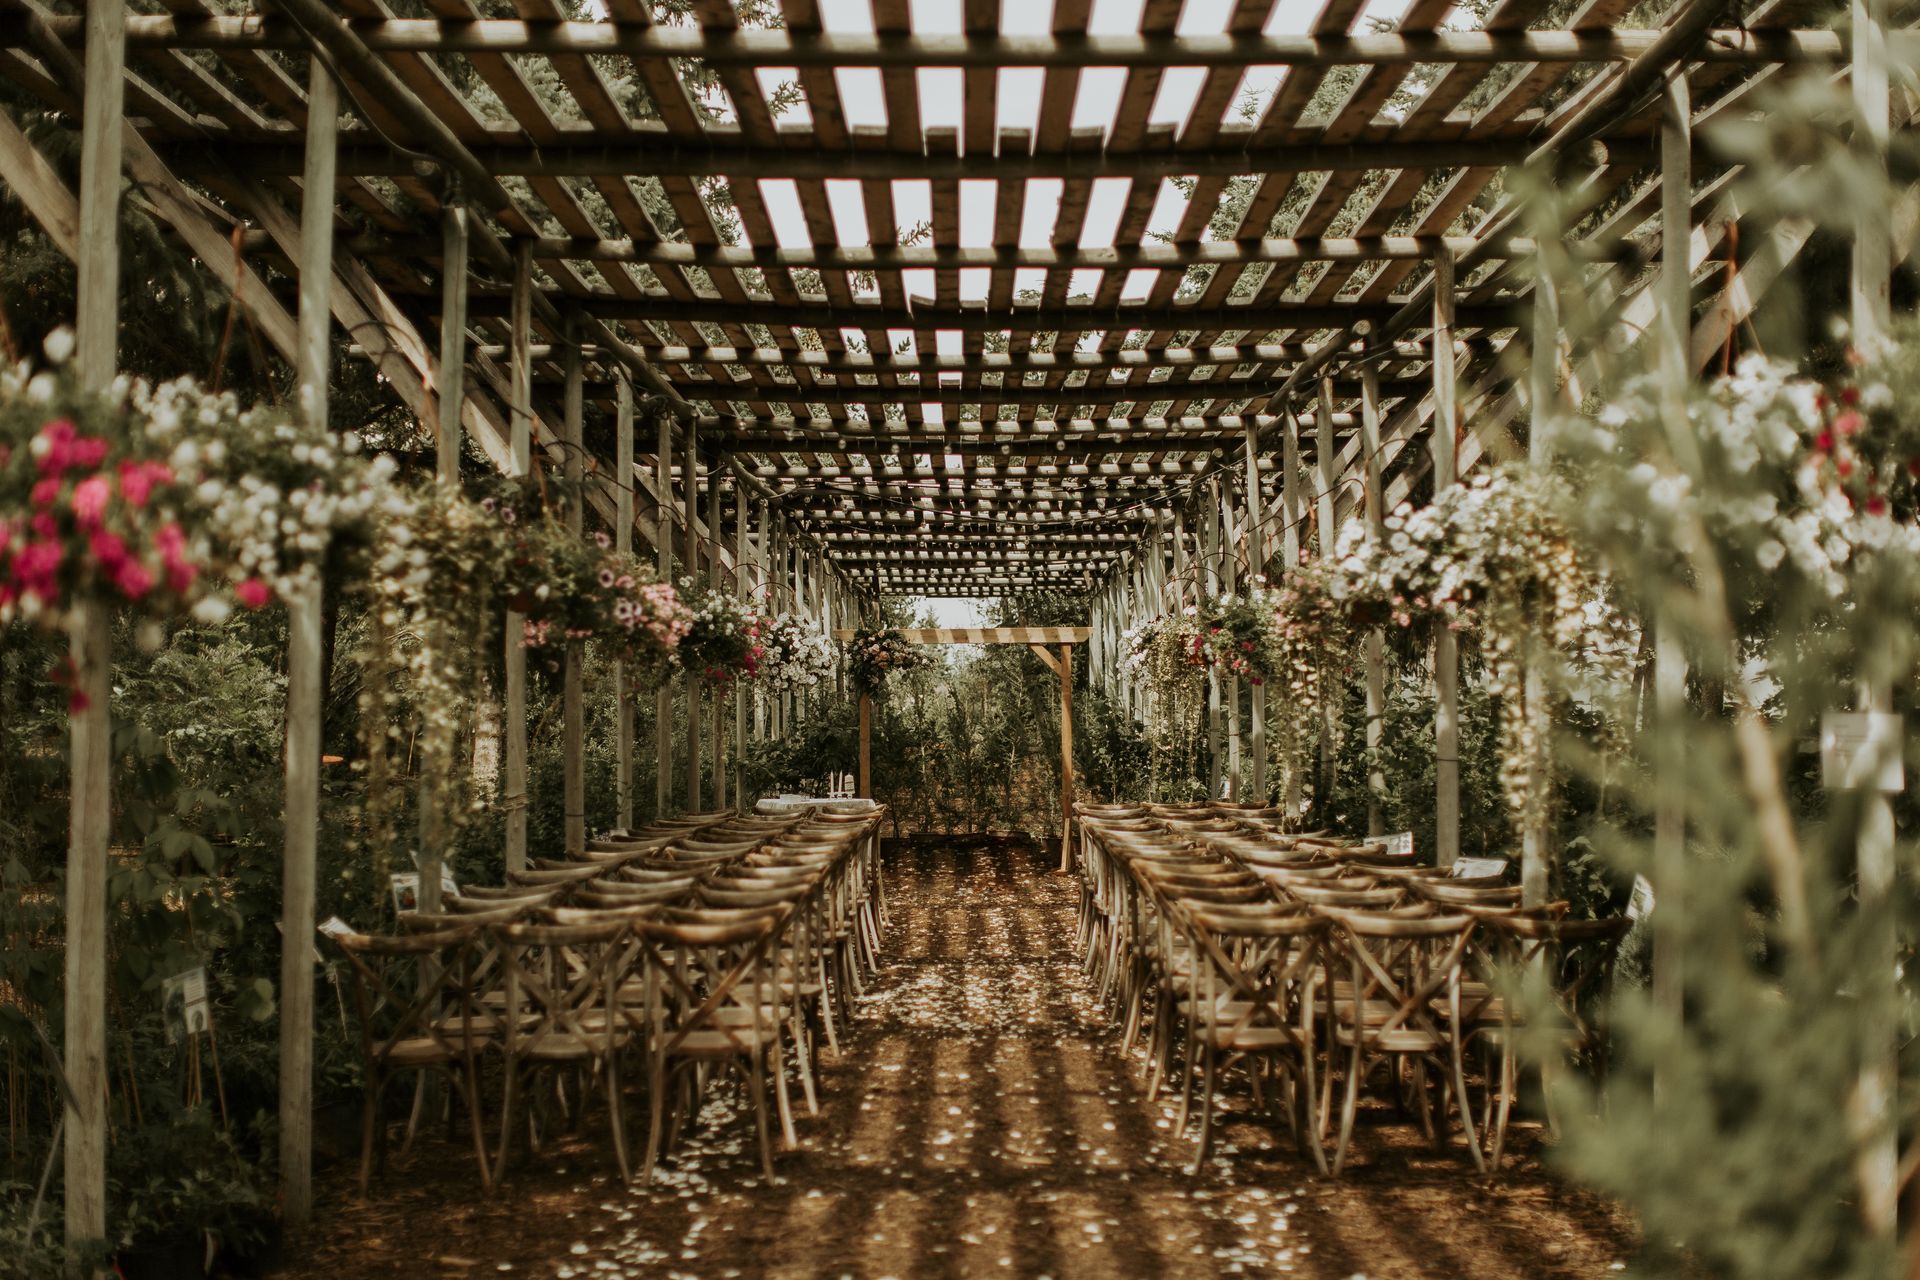 Wedding ceremony set up with wood chairs under a long wood pergola at the Saskatoon Farm.